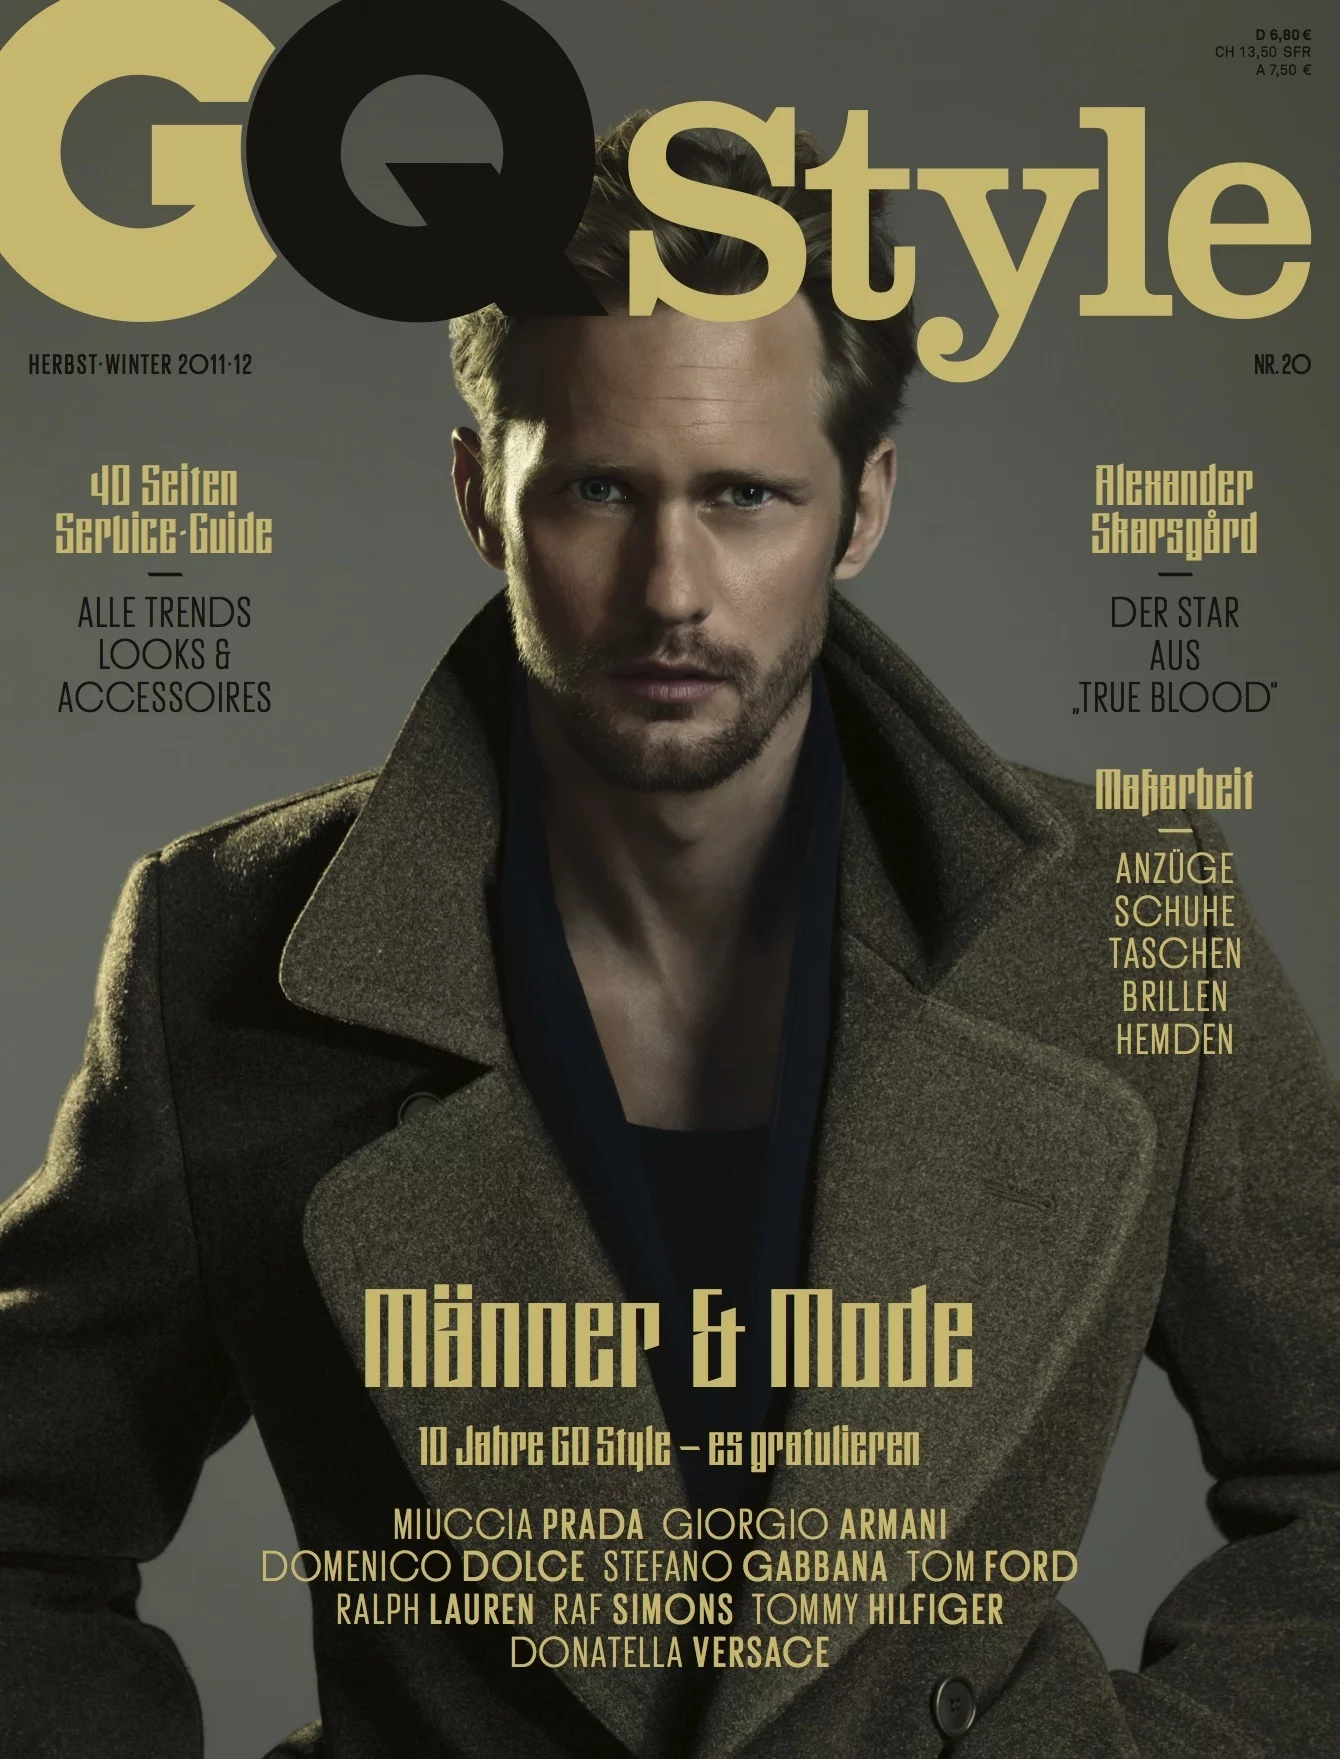 GQ Style 1 by Ralph MECKE